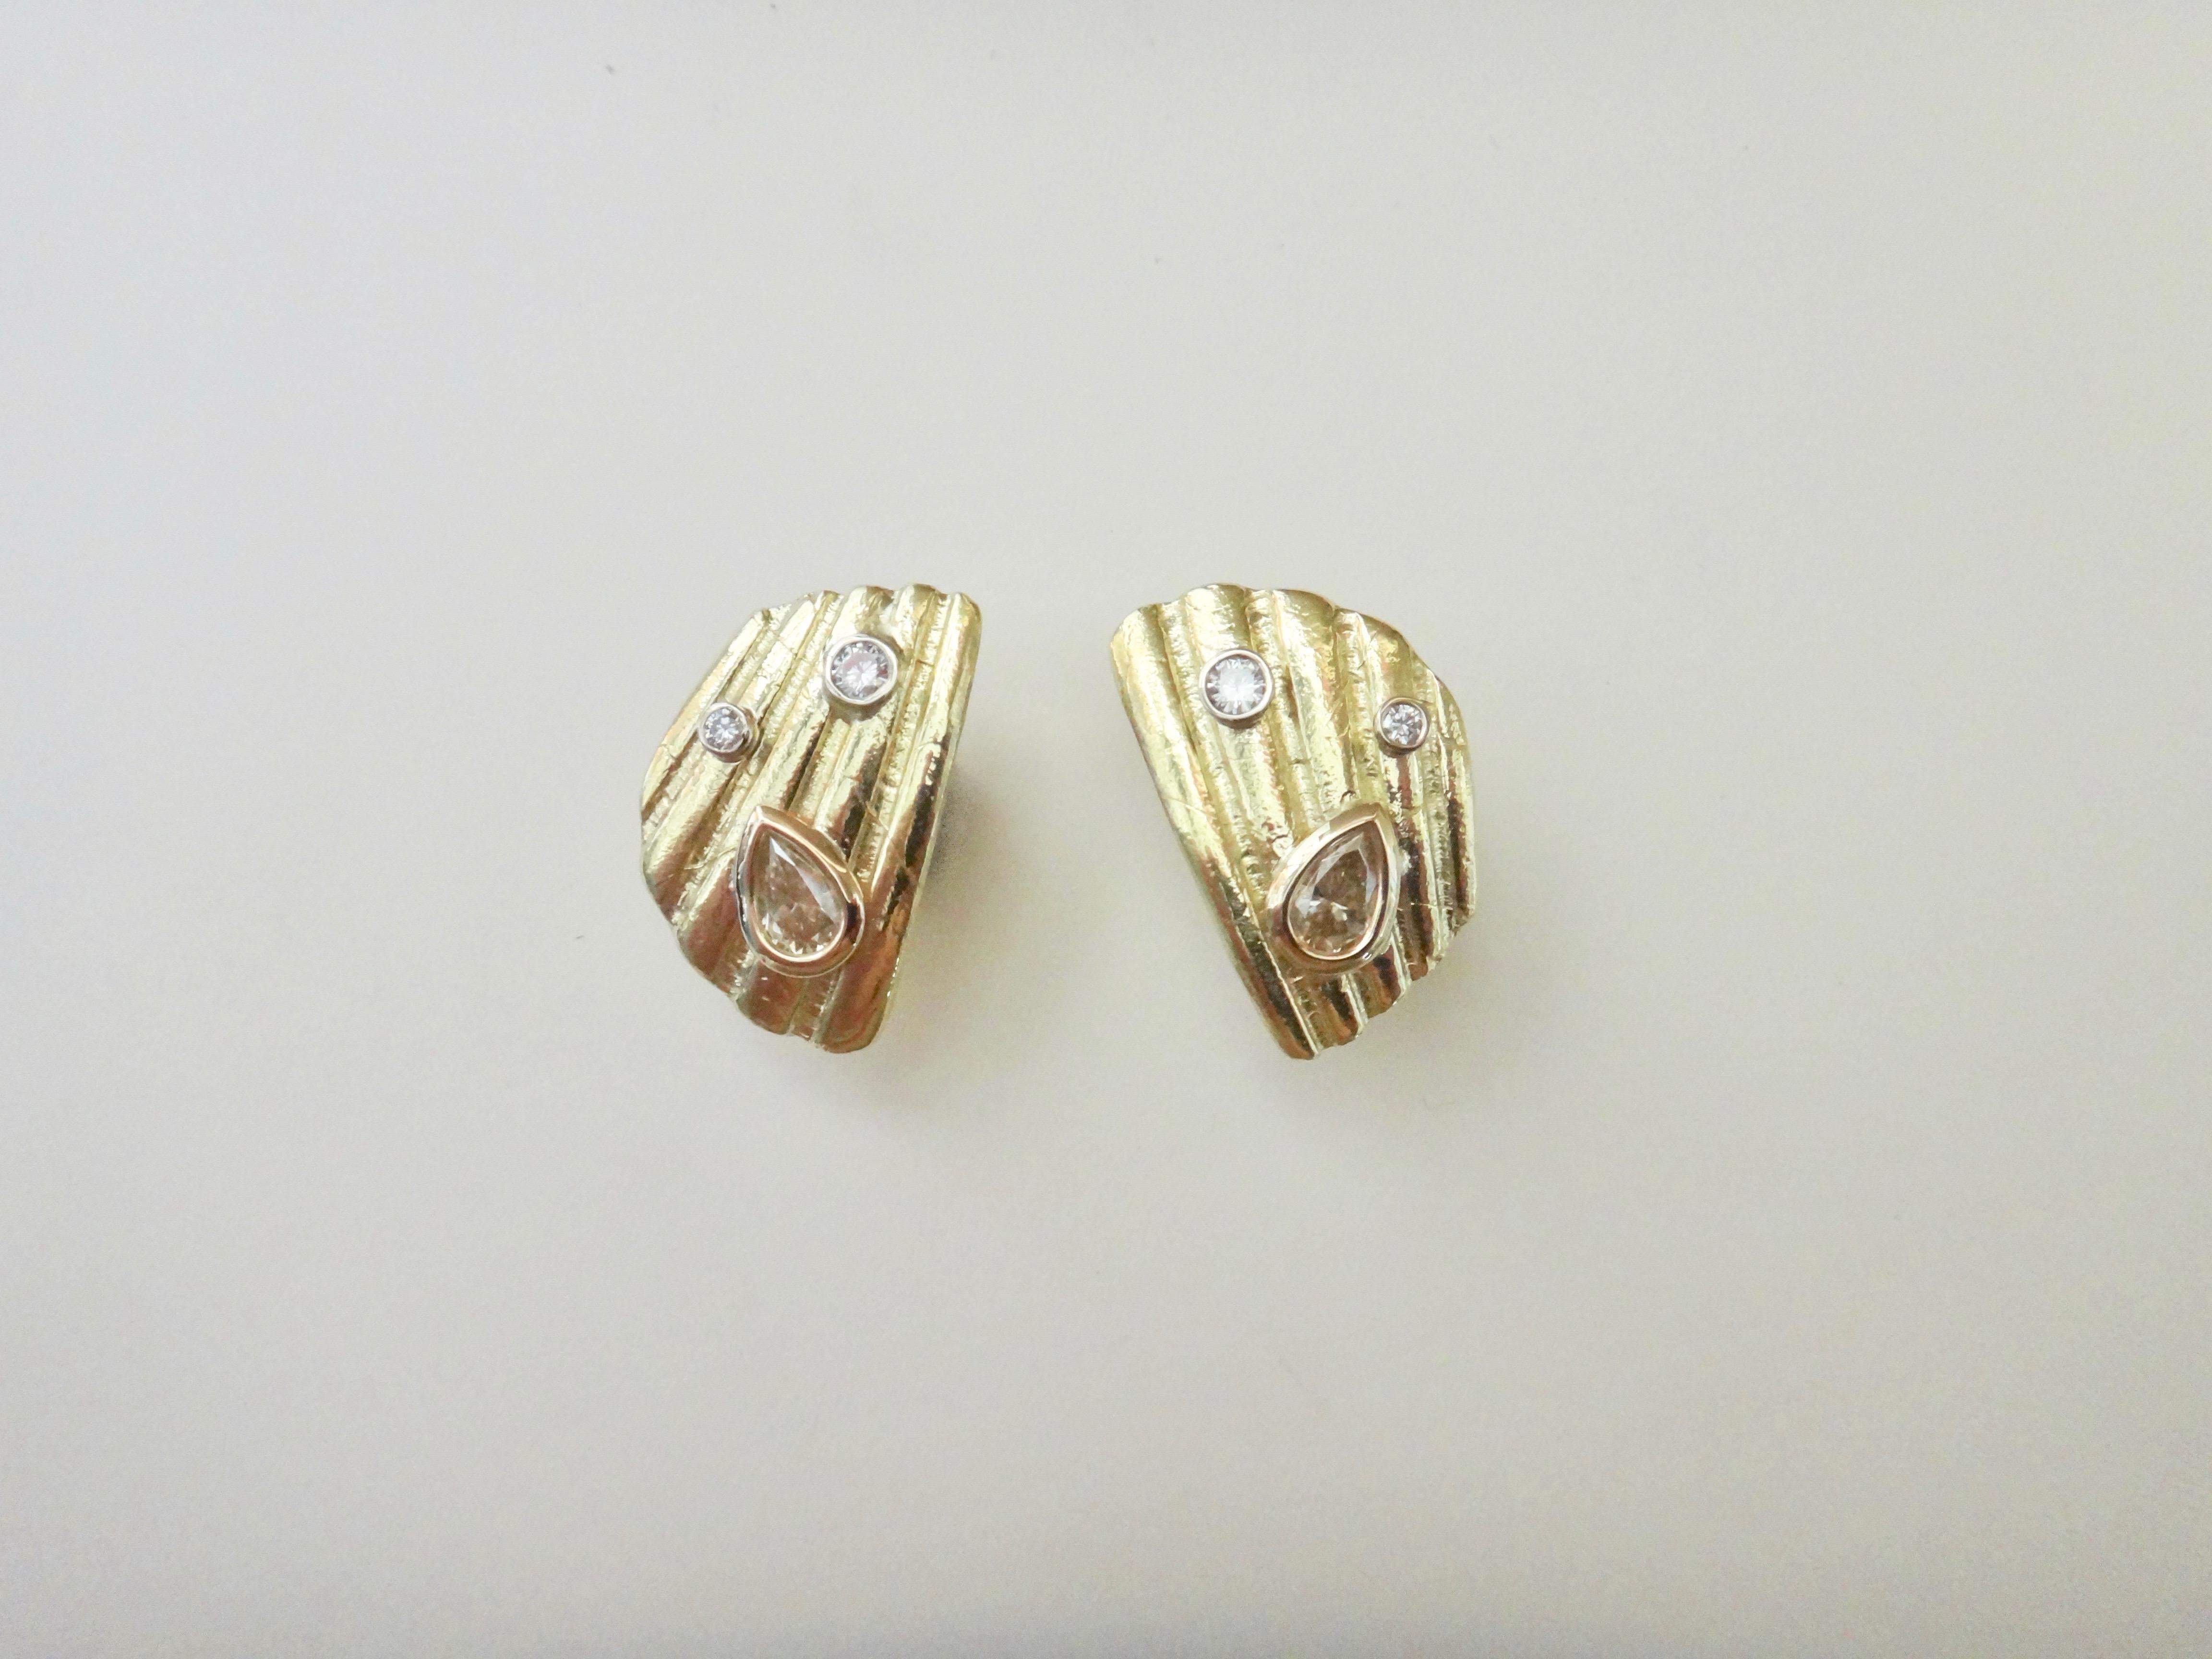 A fragment from an actual shell, tumble polished on the beach was molded to create these 18k yellow gold earrings.  Decorating the surface of each earring are three diamonds.  Two white brilliant cut diamonds are bezel set along with a pear shaped